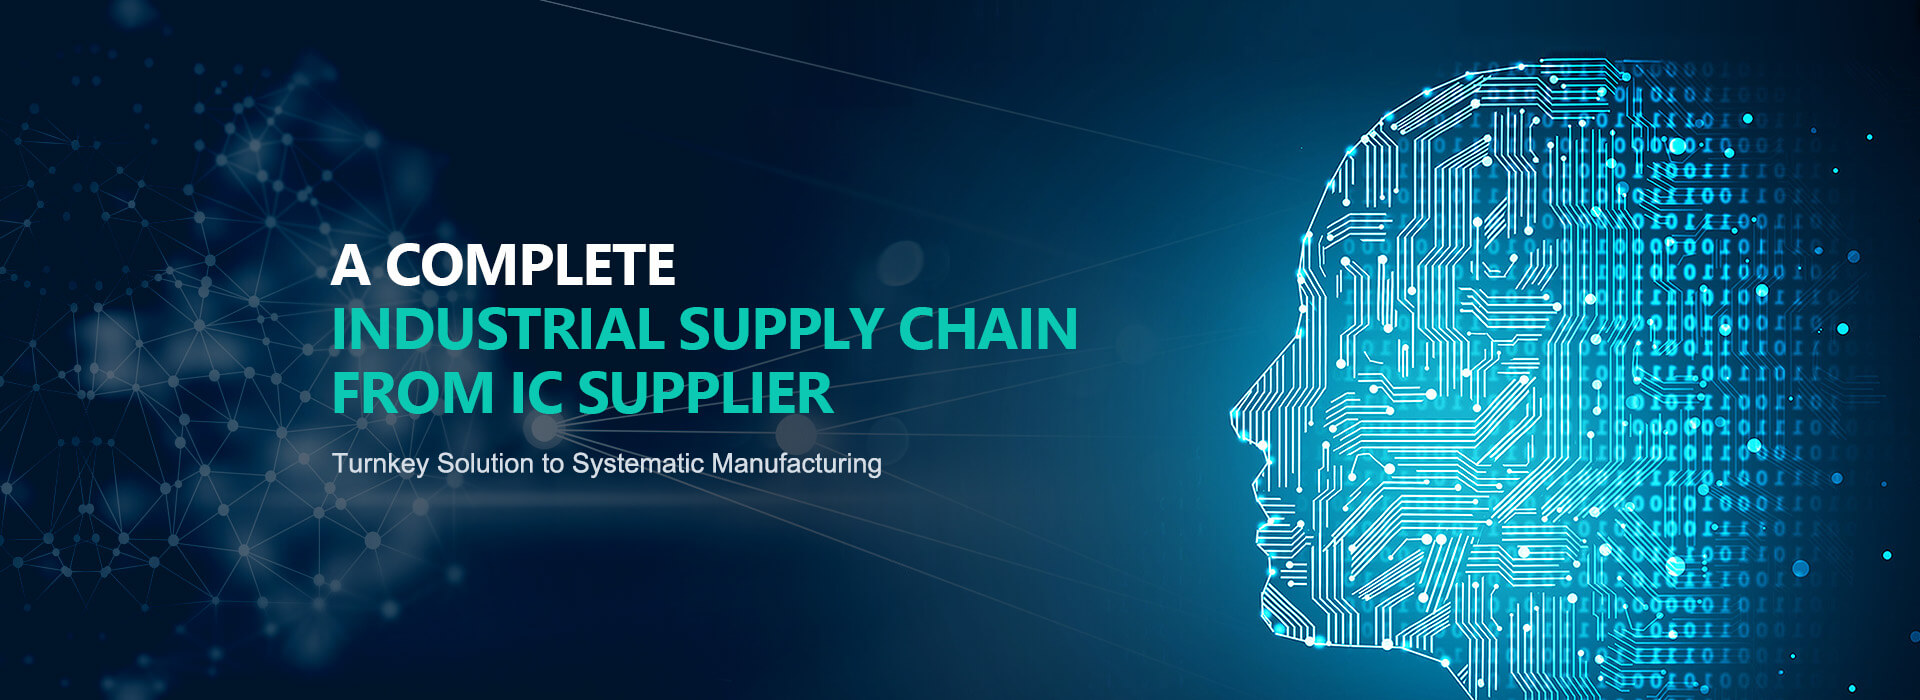 A Complete Industrial Supply Chain from IC supplier, Turnkey Solution to Systematic Manufacturing